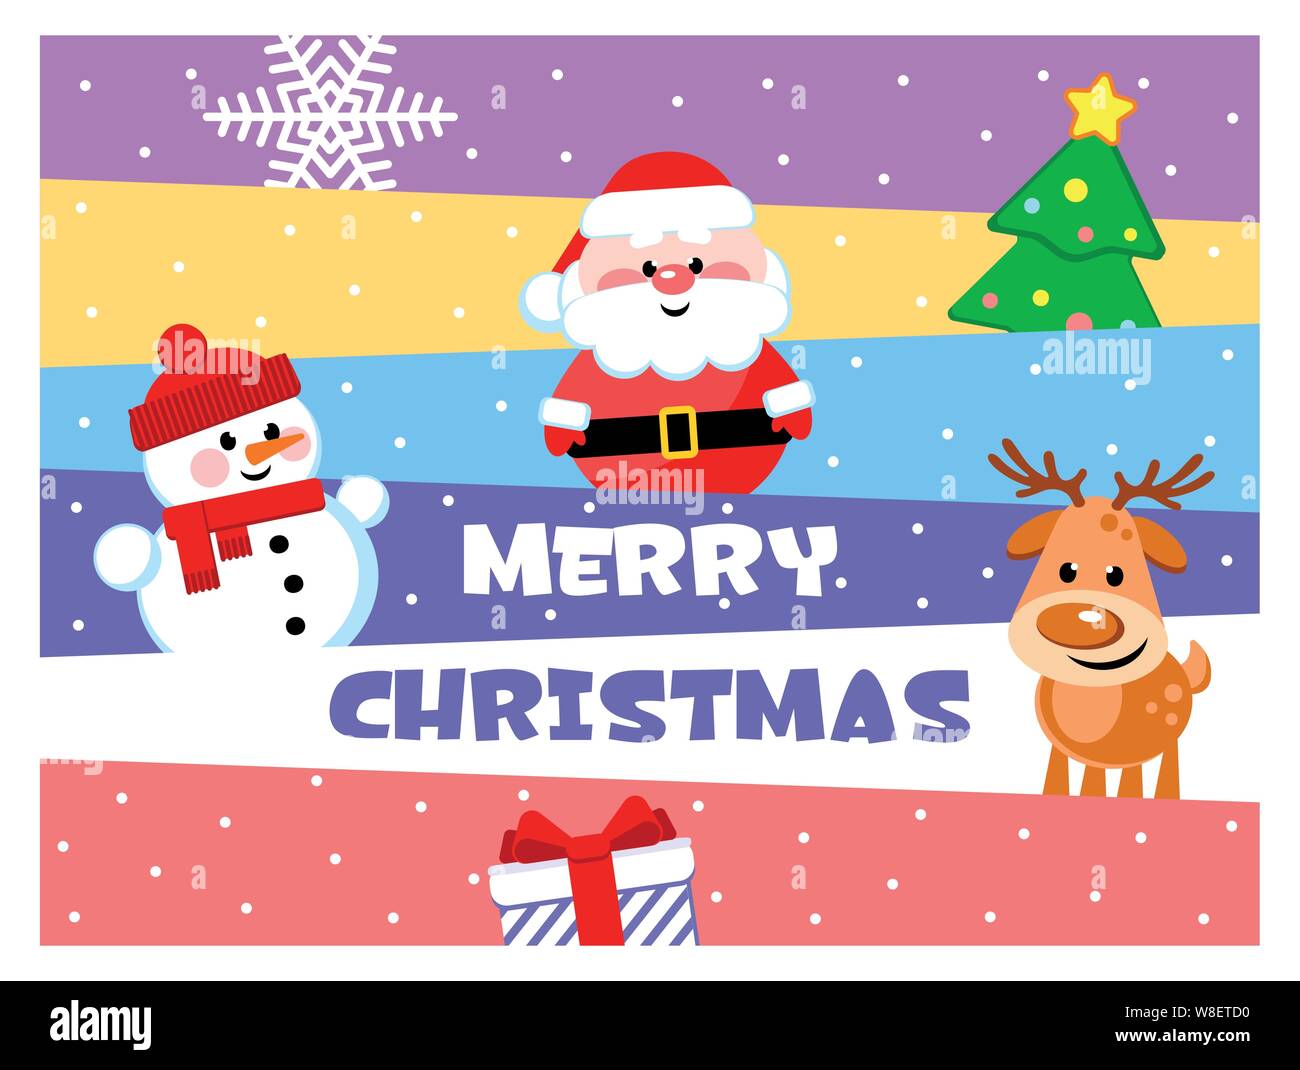 Merry Christmas. Greeting card with funny cartoon characters. Santa Clause, Snowman, Reindeer. Flat design. Vector illustration. Stock Vector